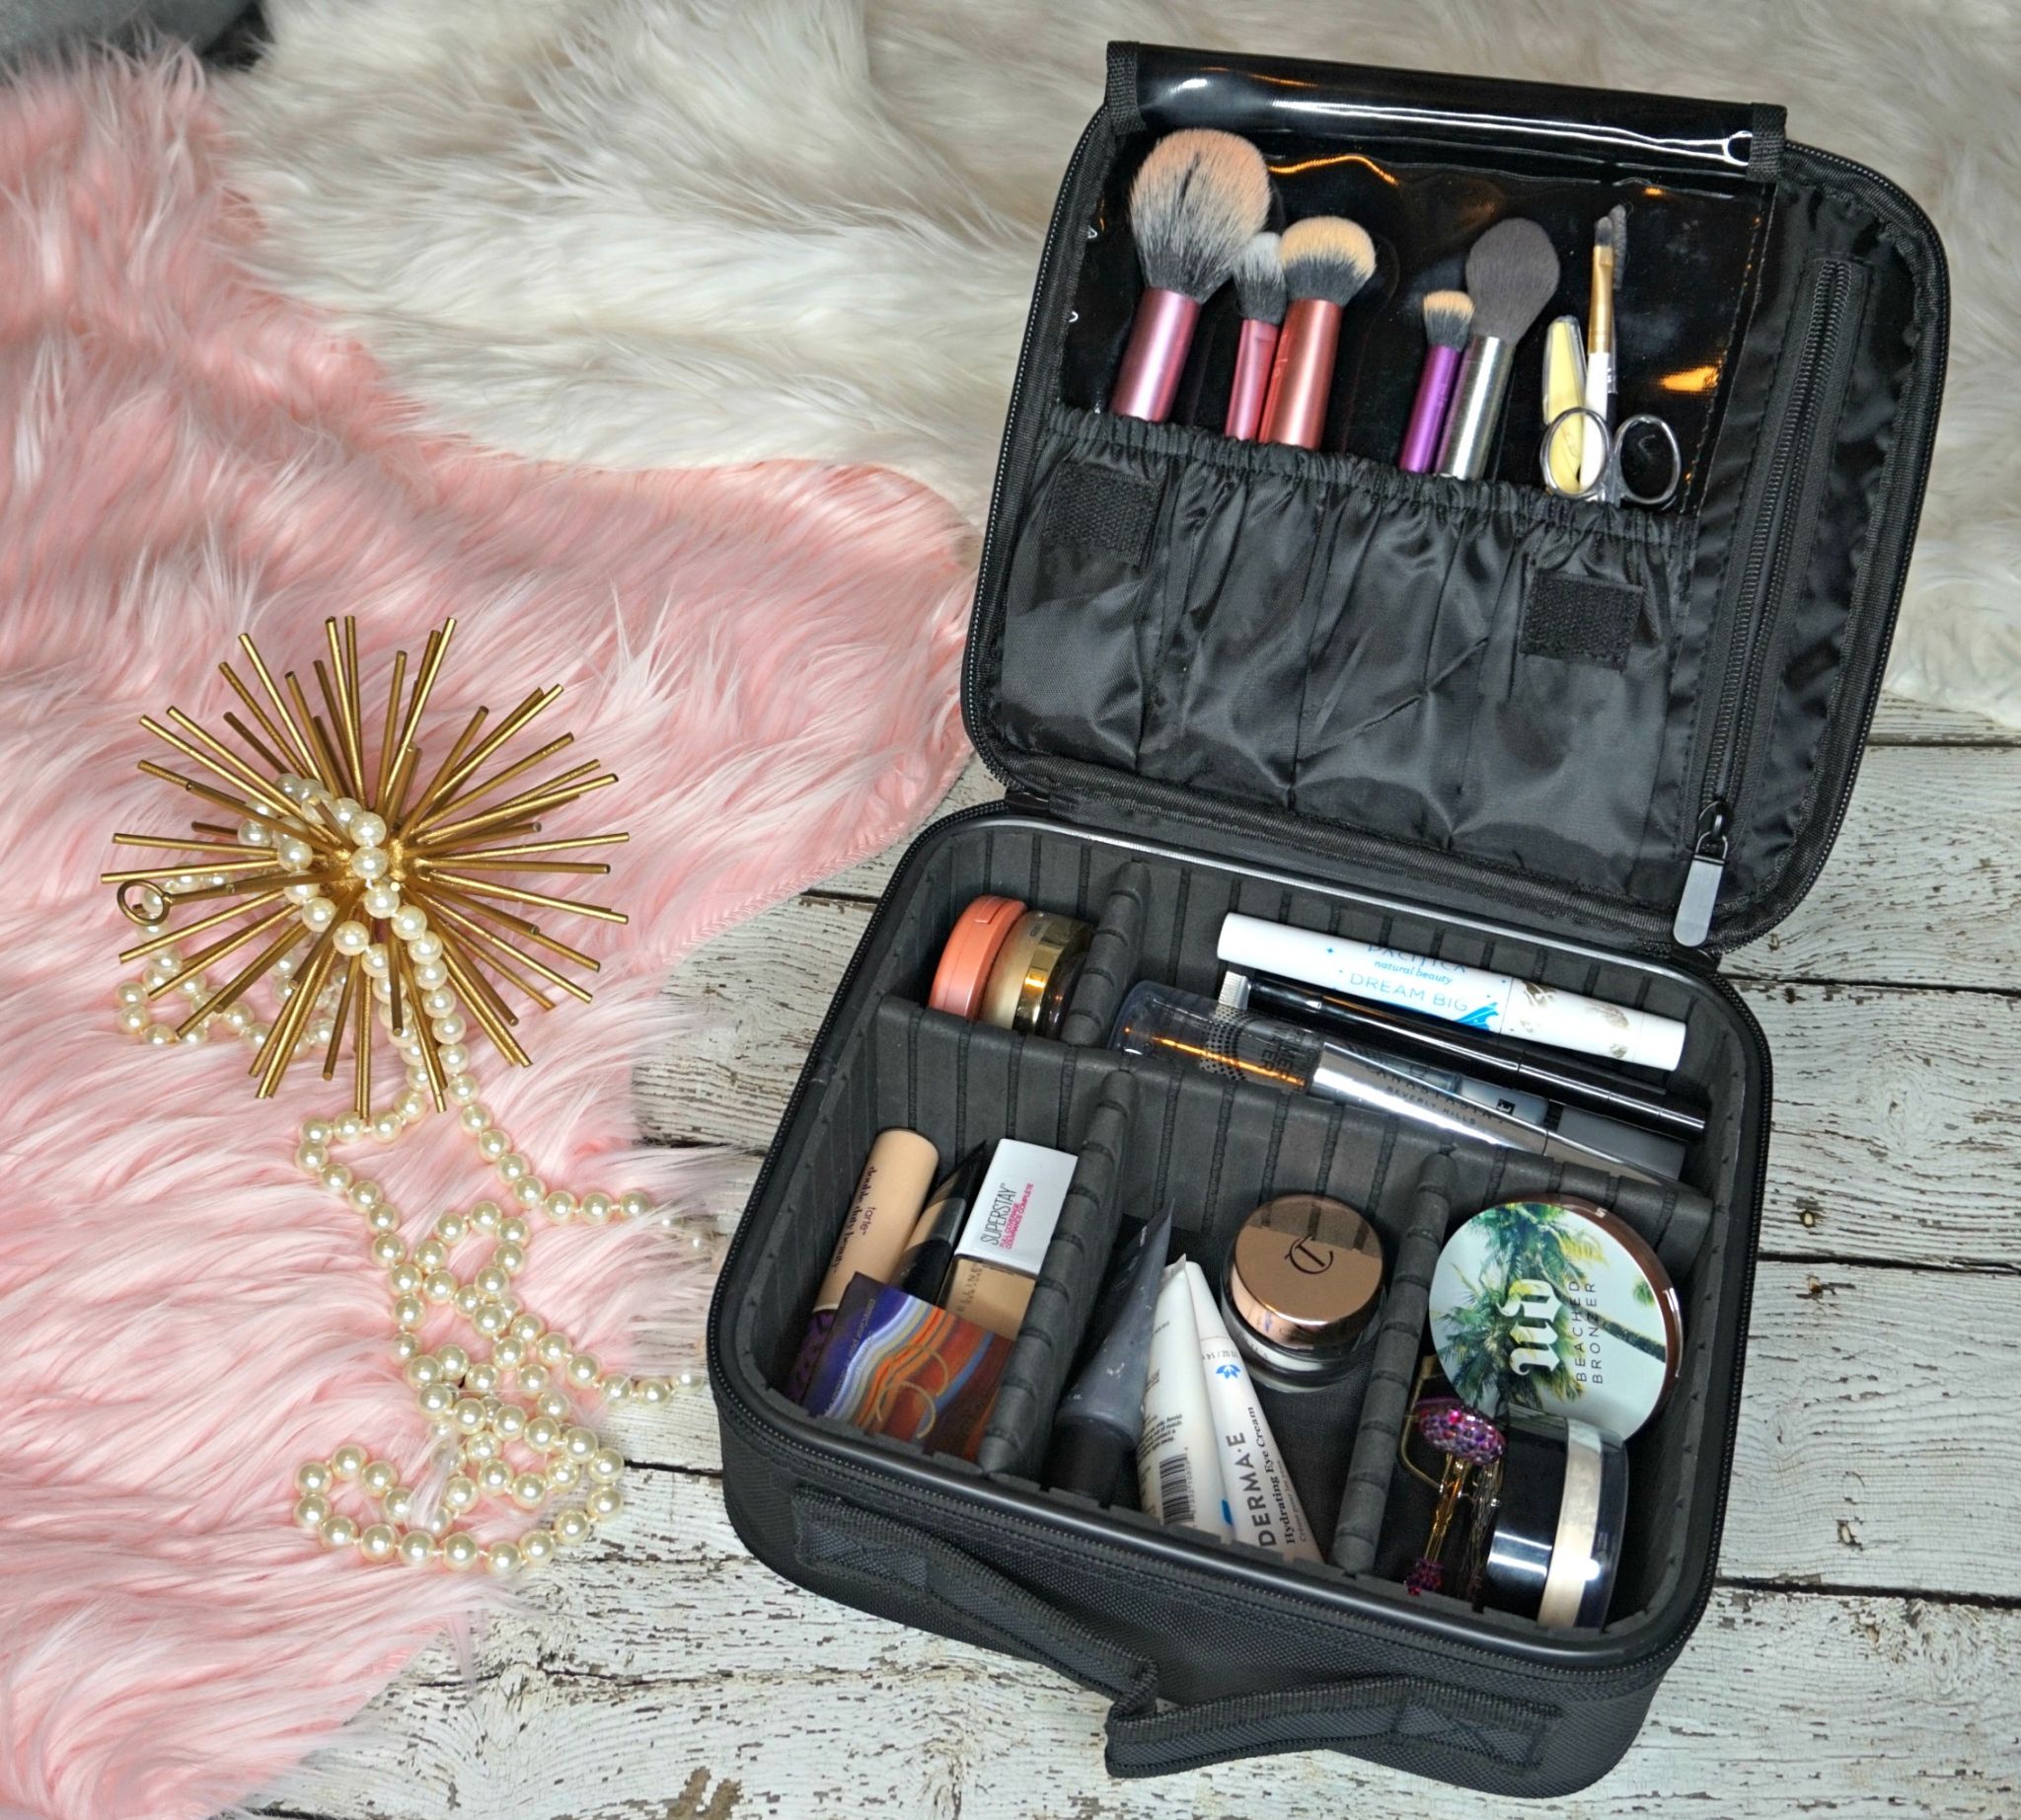 Travel Makeup Bag Essentials // Must Have Travel Makeup Bag // Must Have Makeup Products // Travel Makeup Tips | Beauty With Lily #beautyblogger #makeuptips #beautyhacks